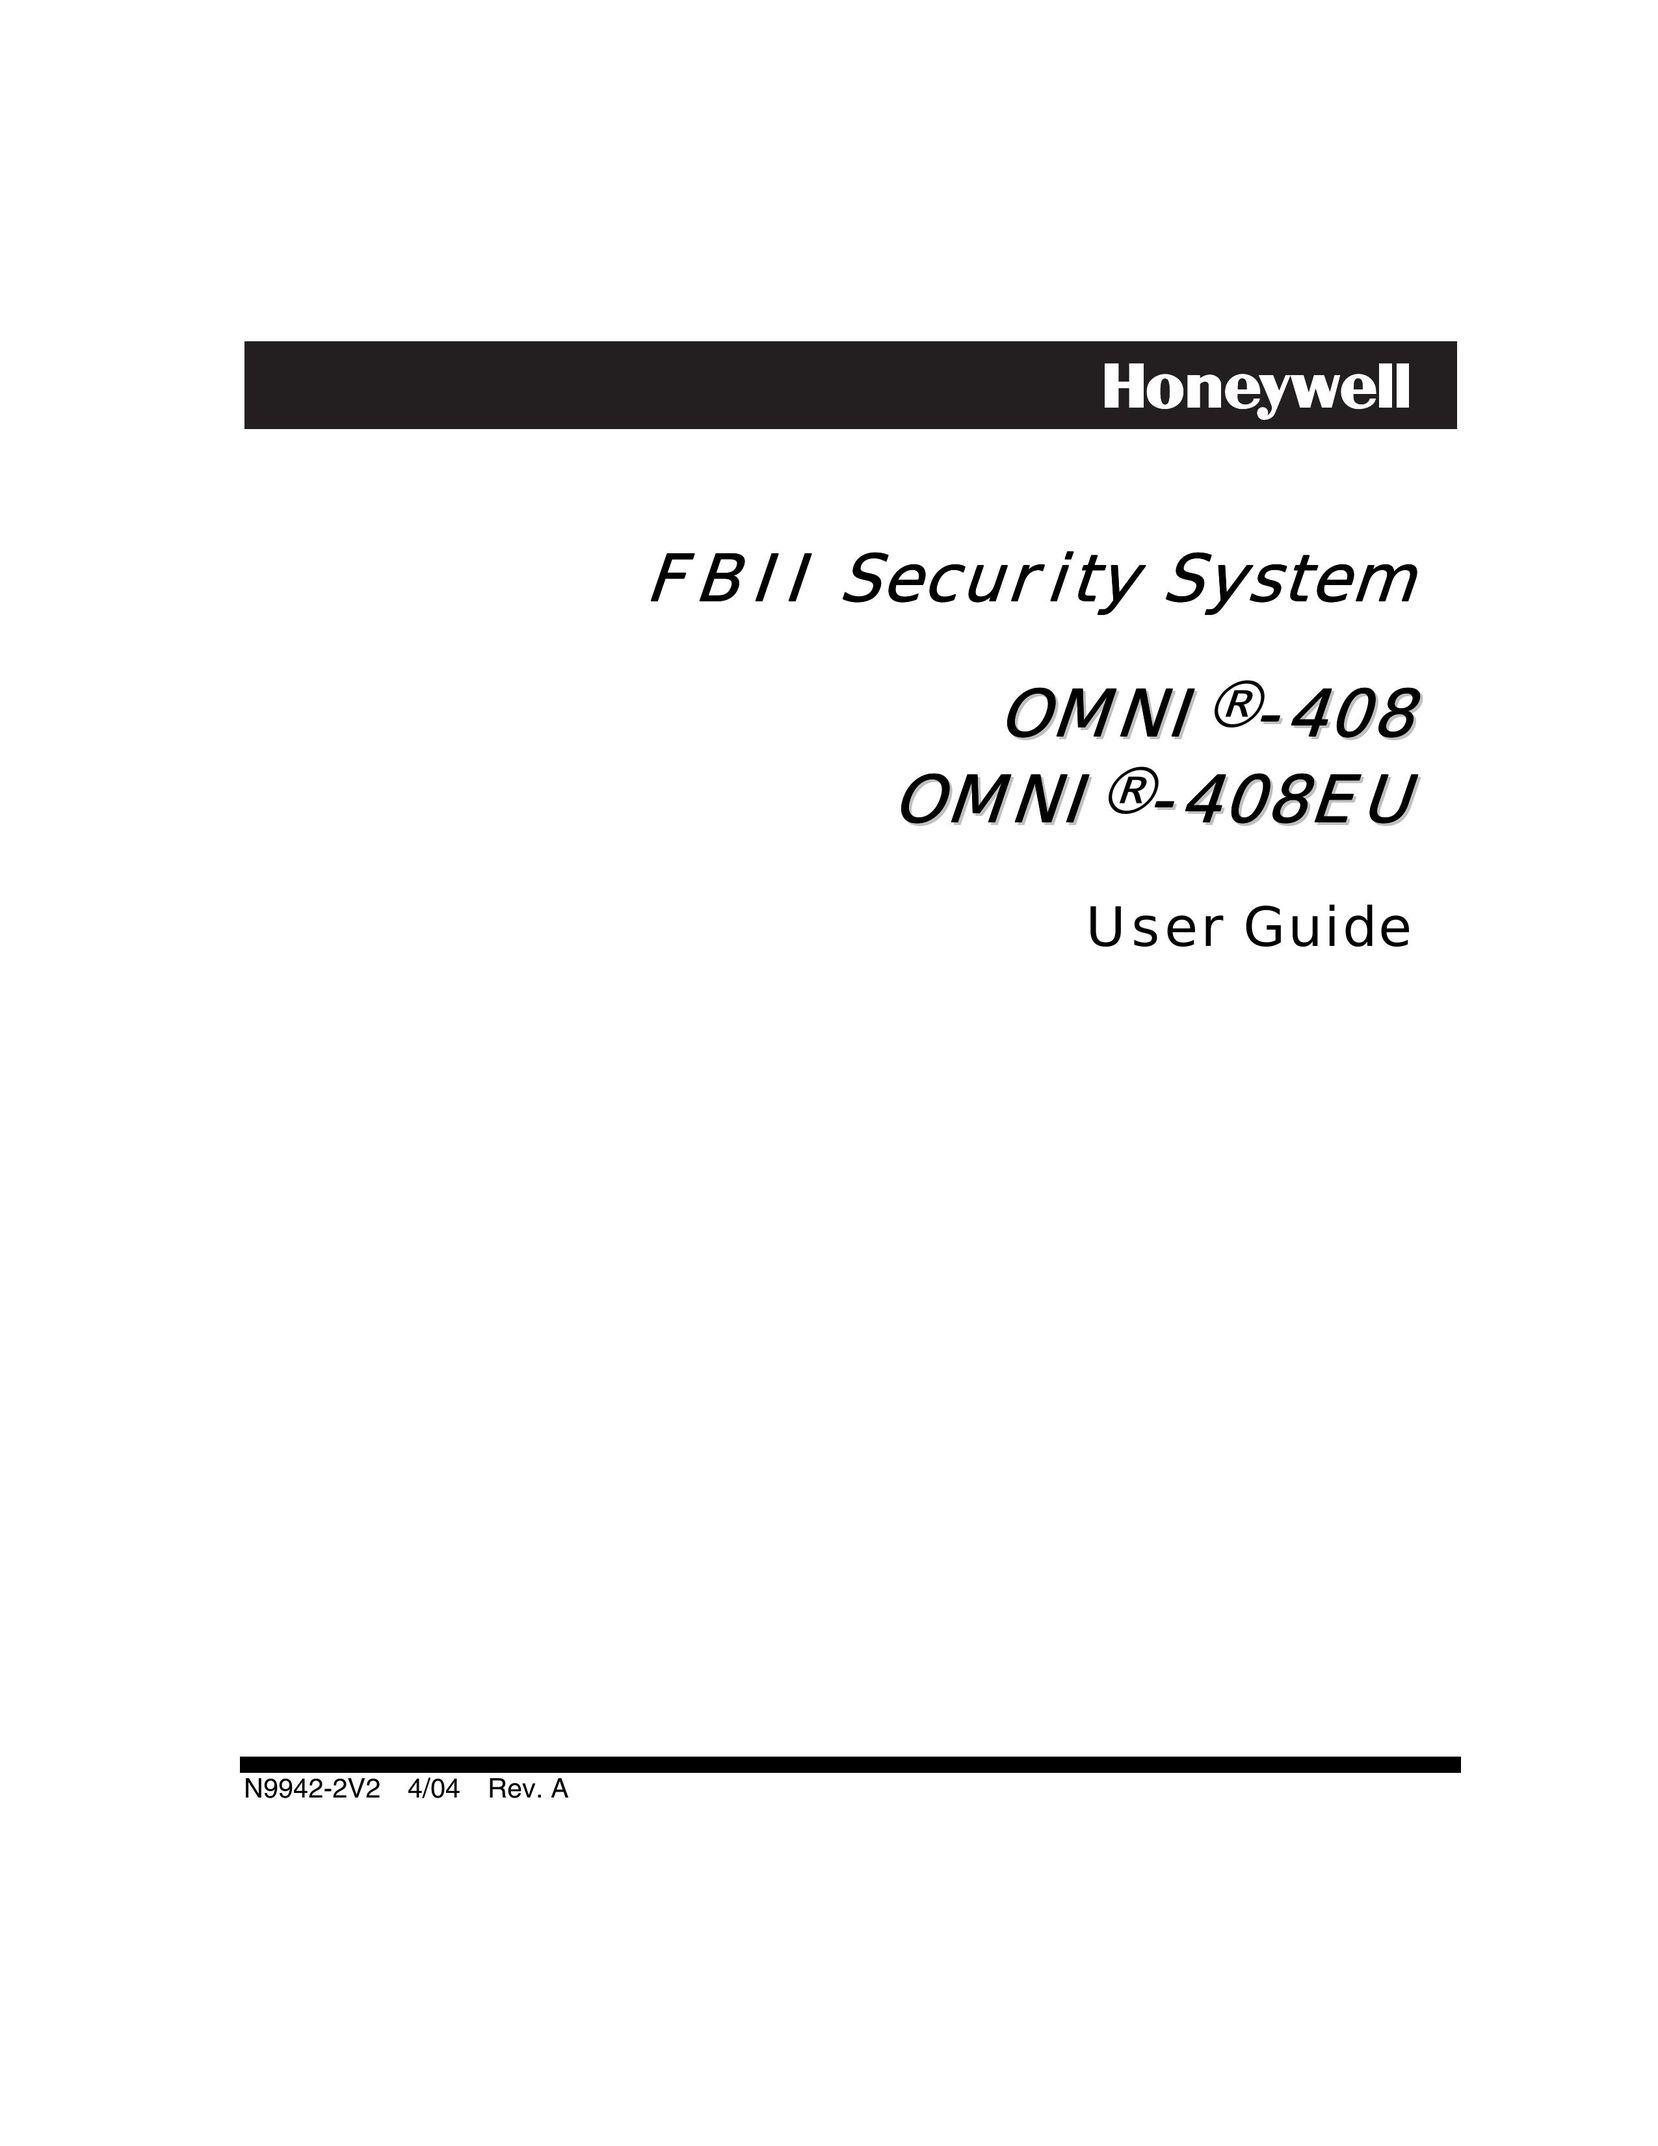 Honeywell 408 Home Security System User Manual